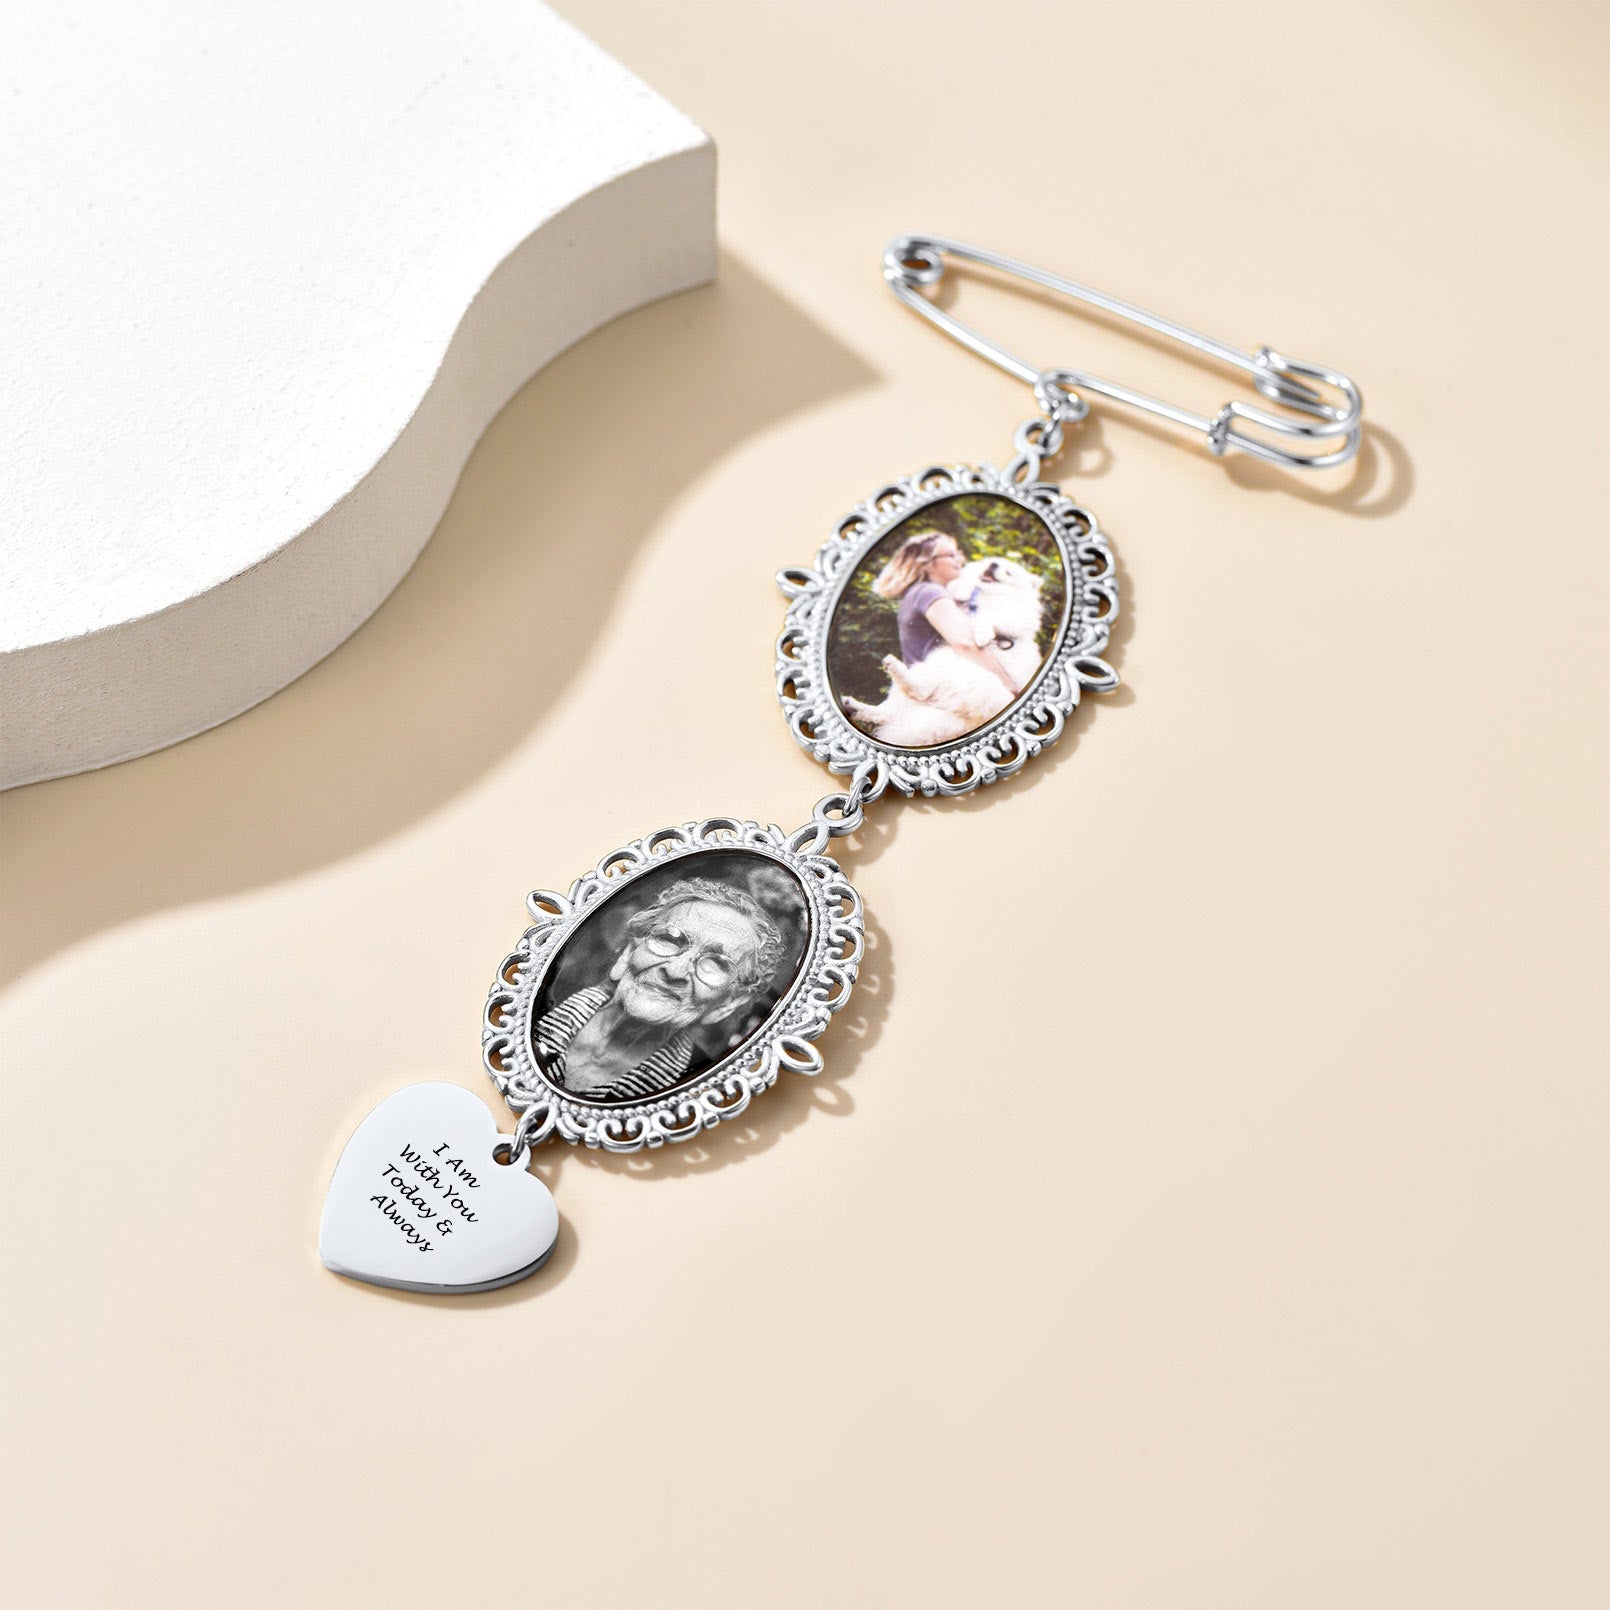 Personalized Bouquet Photo Charms Brooch Pins for Wedding